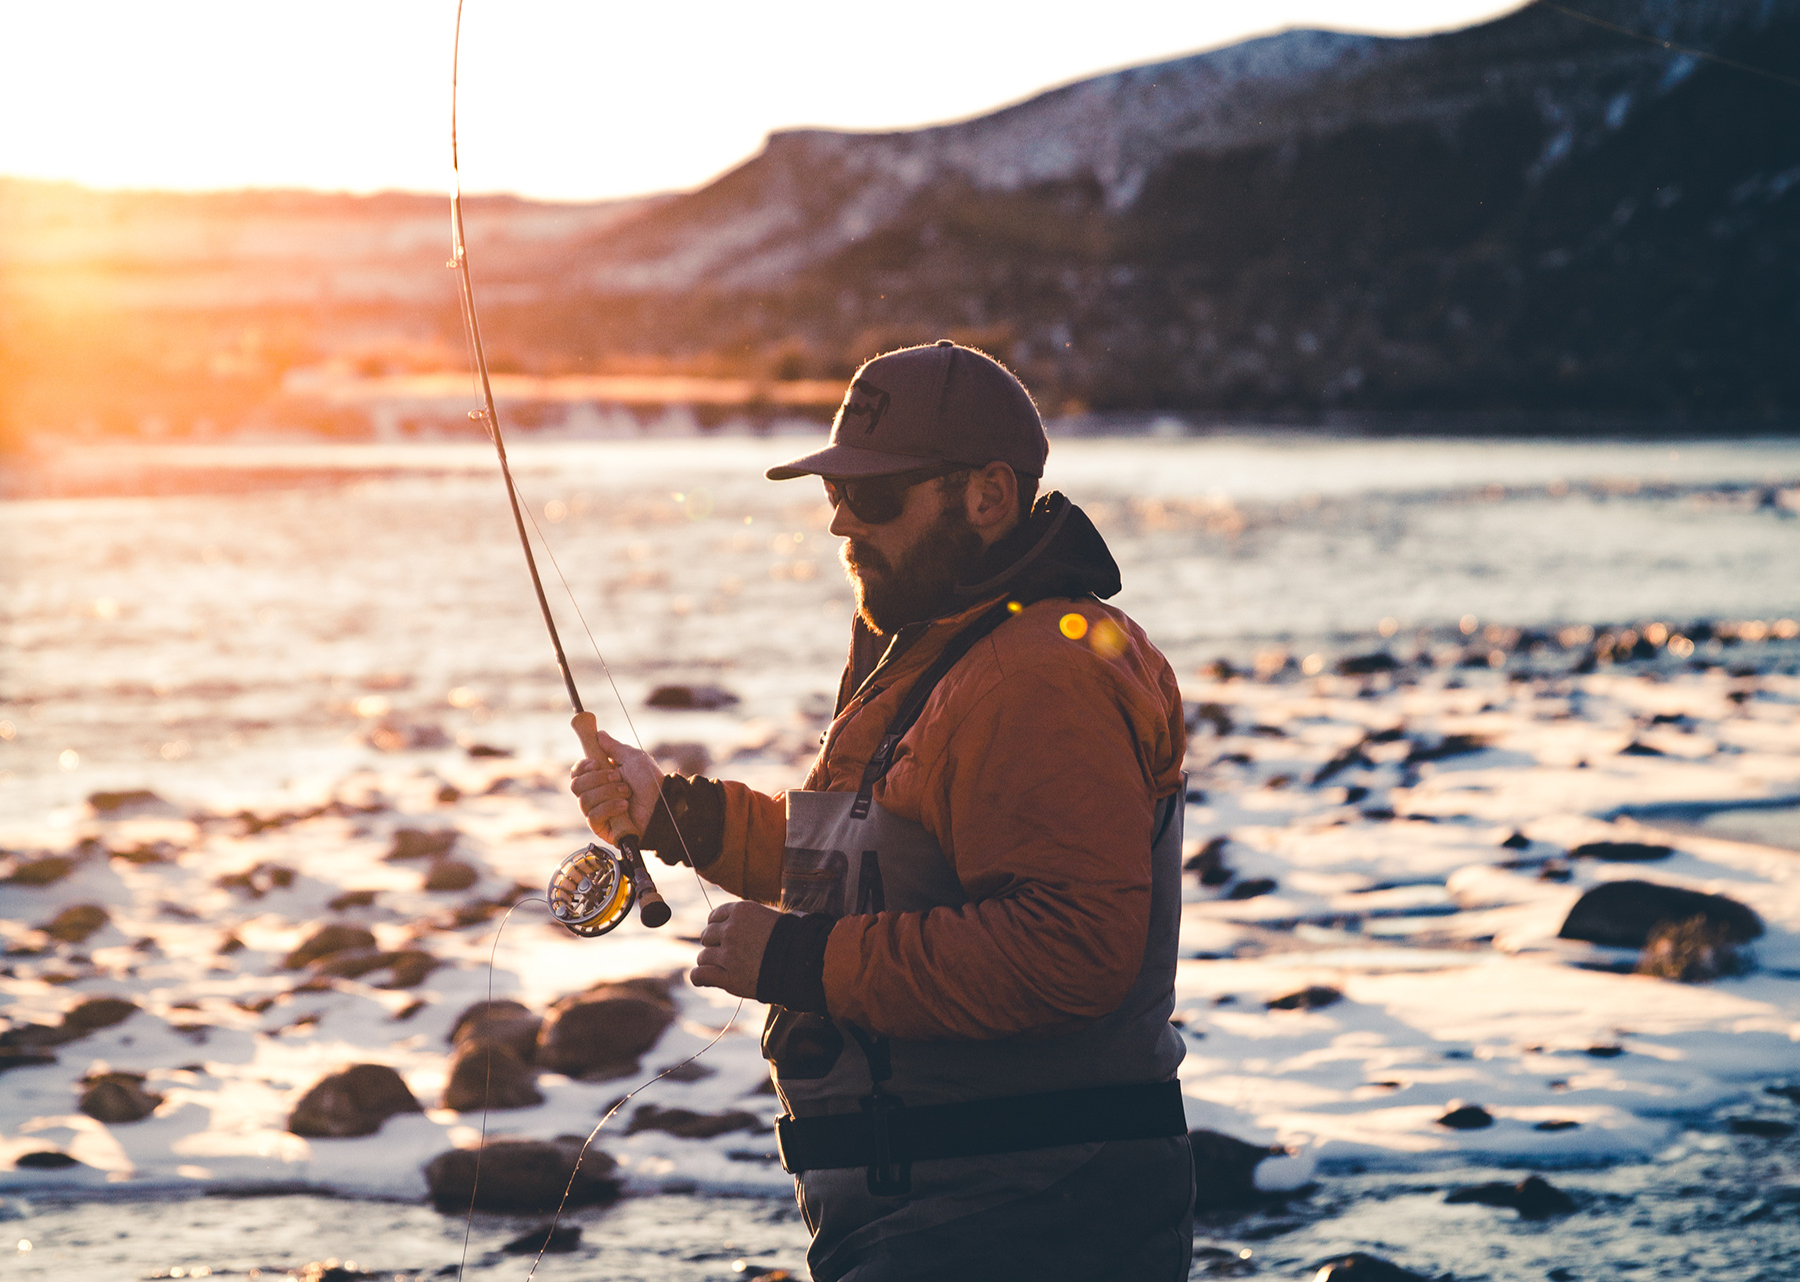 Wyoming Fly Fishing Lessons - Wyoming Anglers, learn fly fishing